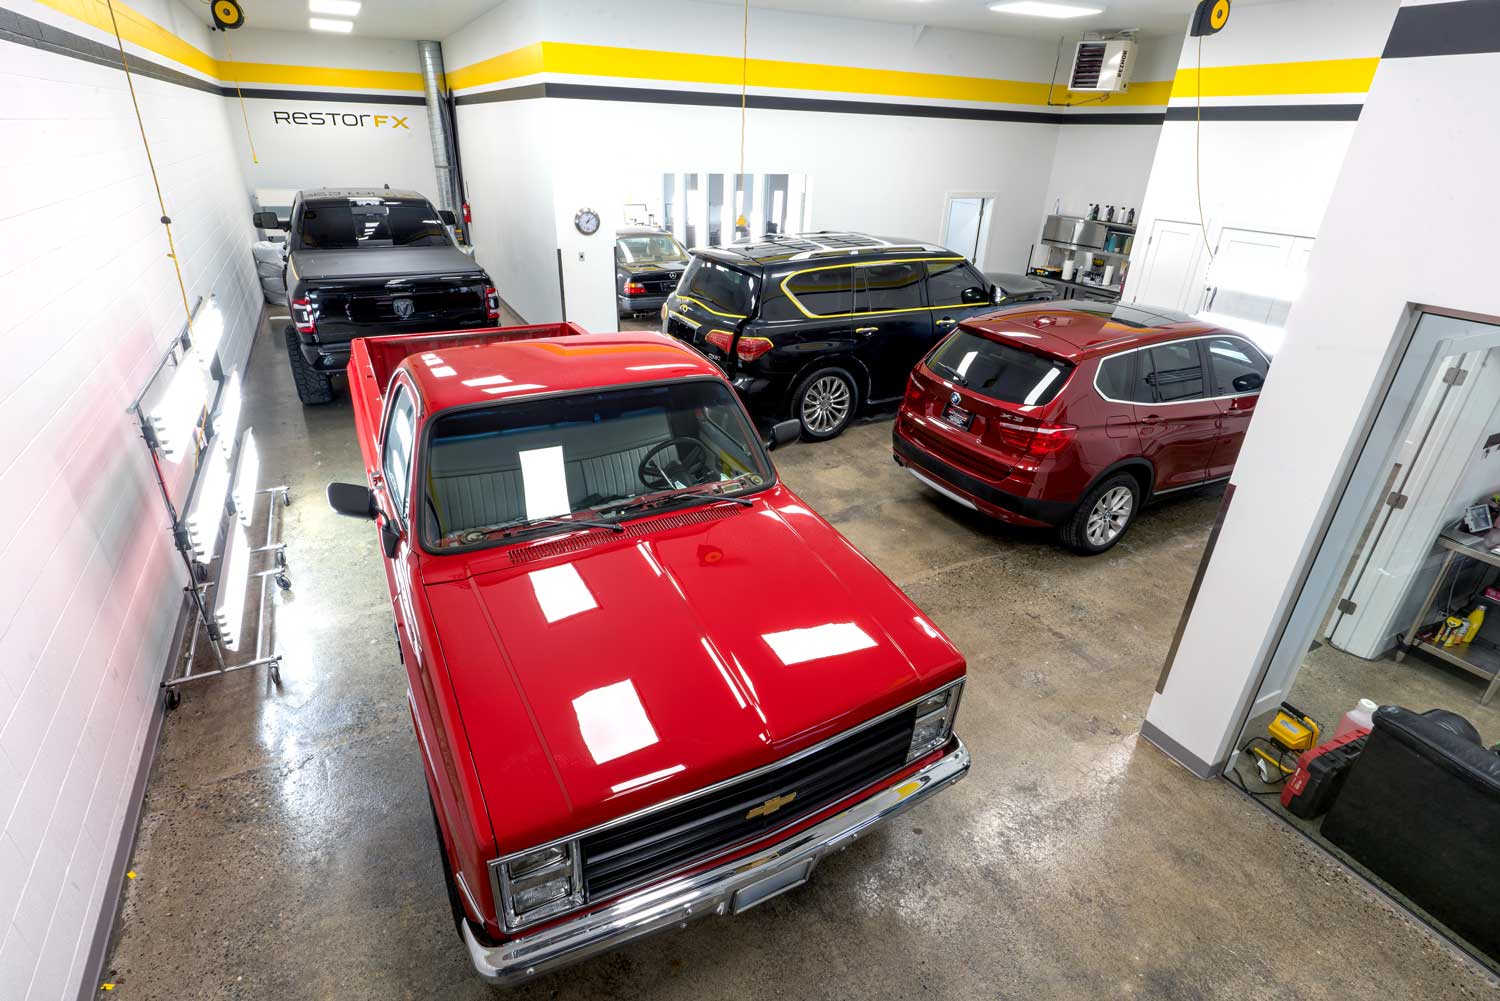 RestorFX center shop area with a red Chevy pickup truck, BMW X3 SUV, black Audi SUV and Ram truck